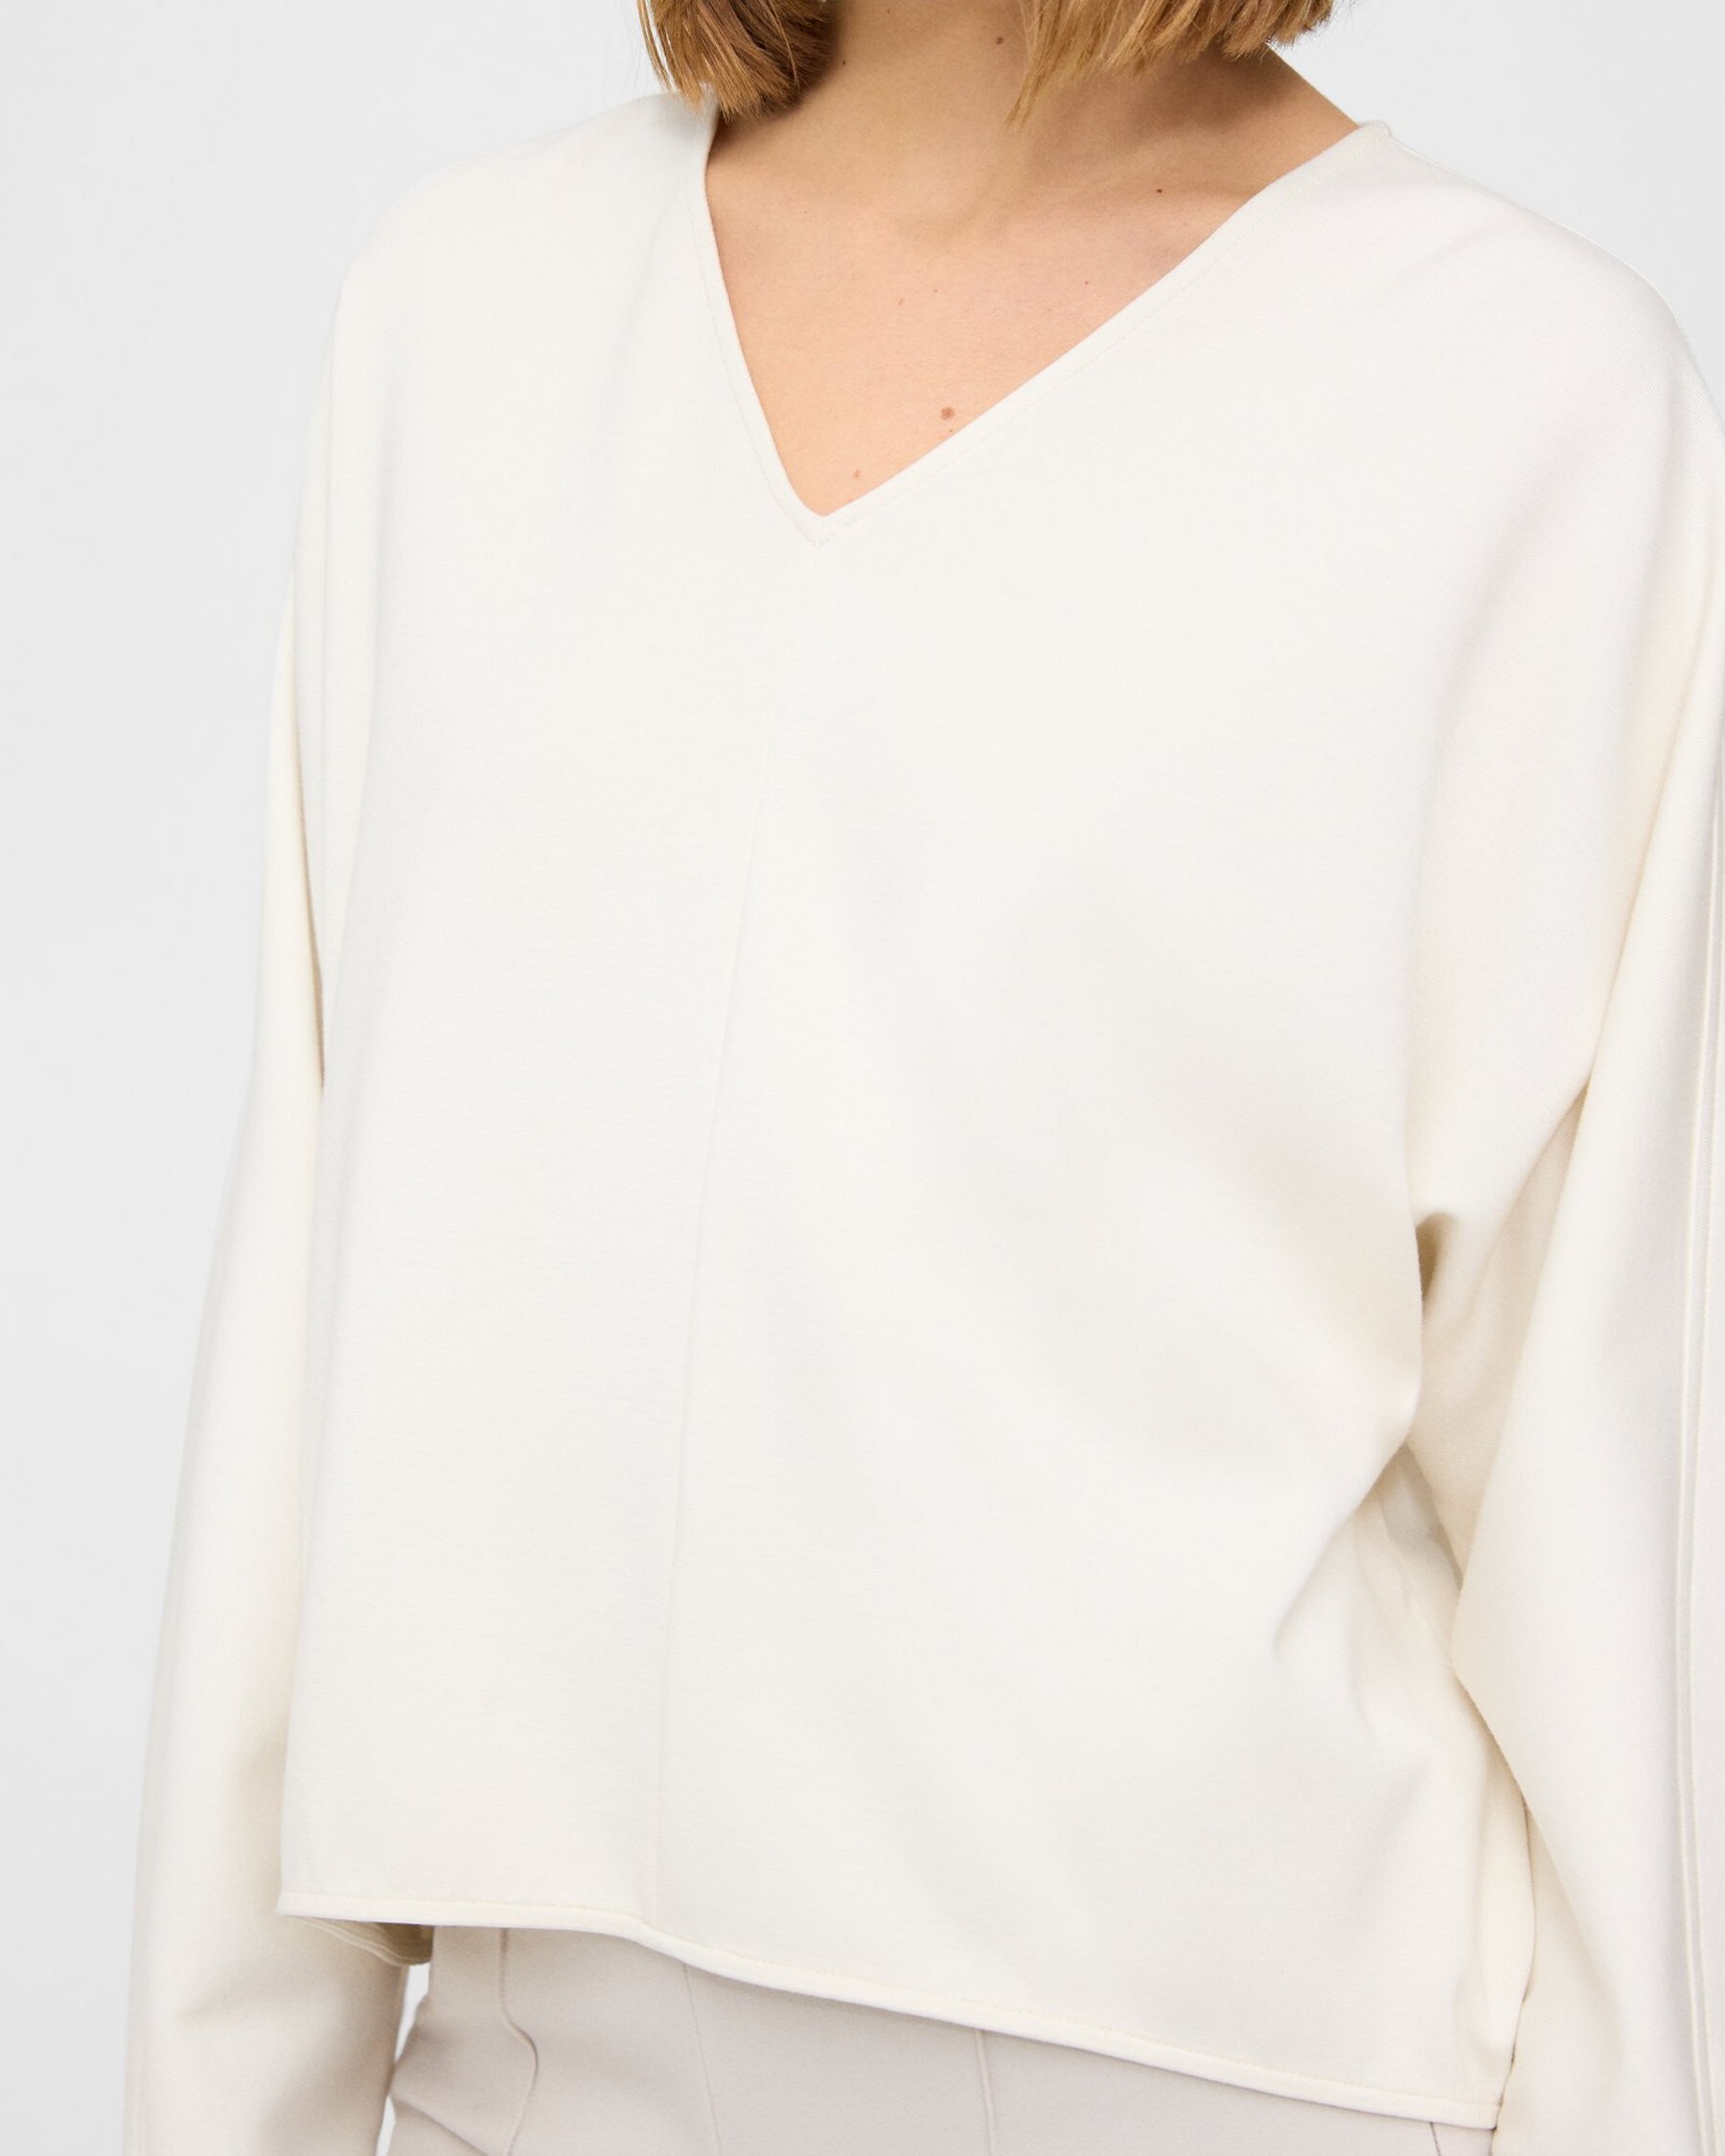 Sculpted V-Neck Top in Double-Knit Jersey